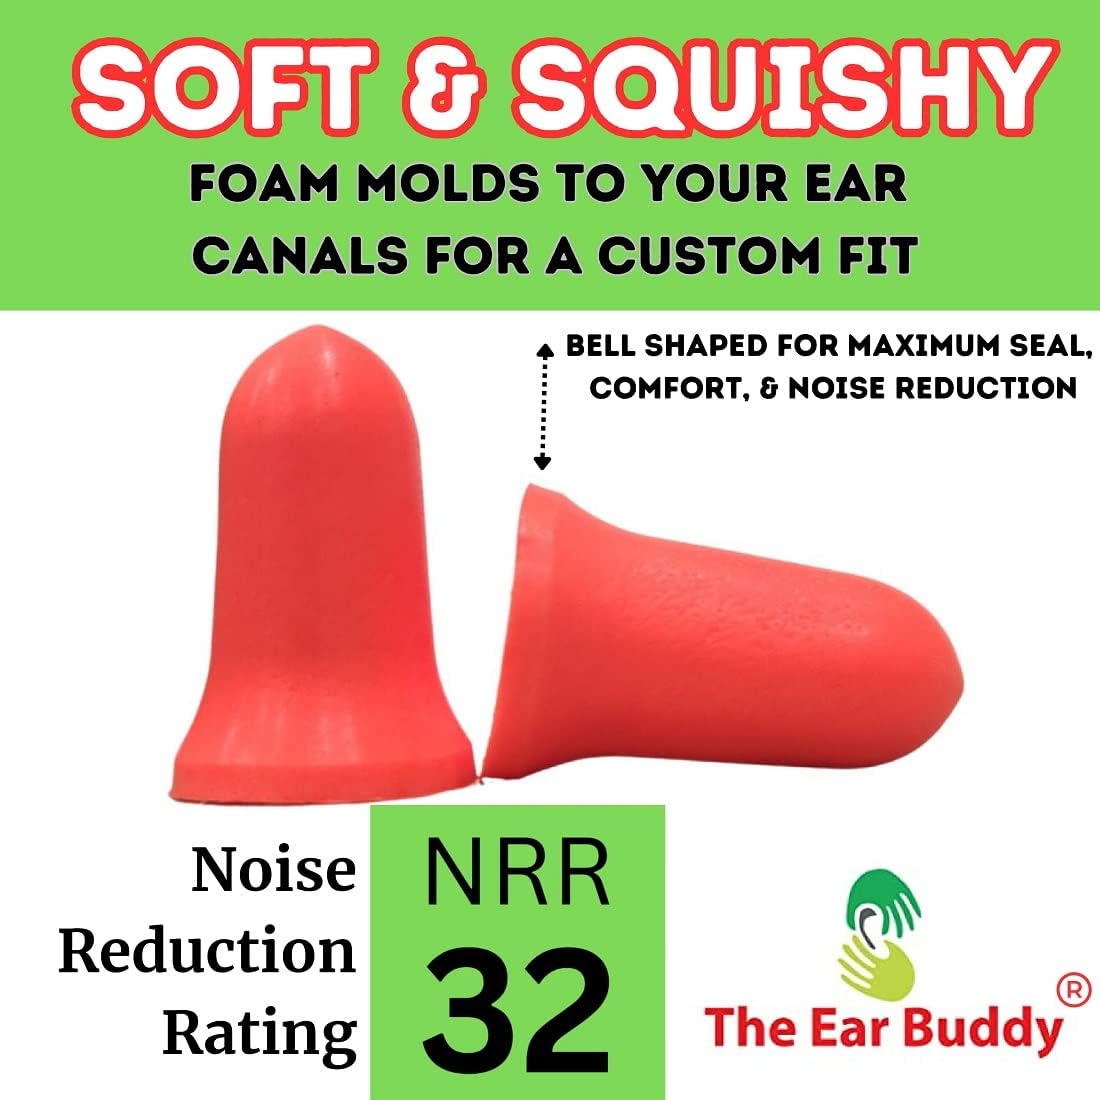 The Ear Buddy Premium Soft Foam Ear Plugs, Noise Cancelling Earplugs For Sleeping, Hearing Protection For Concerts, Work, Shooting & Travel, Noise Reduction Rating 32 Decibels, 50 Pairs - image 2 of 9